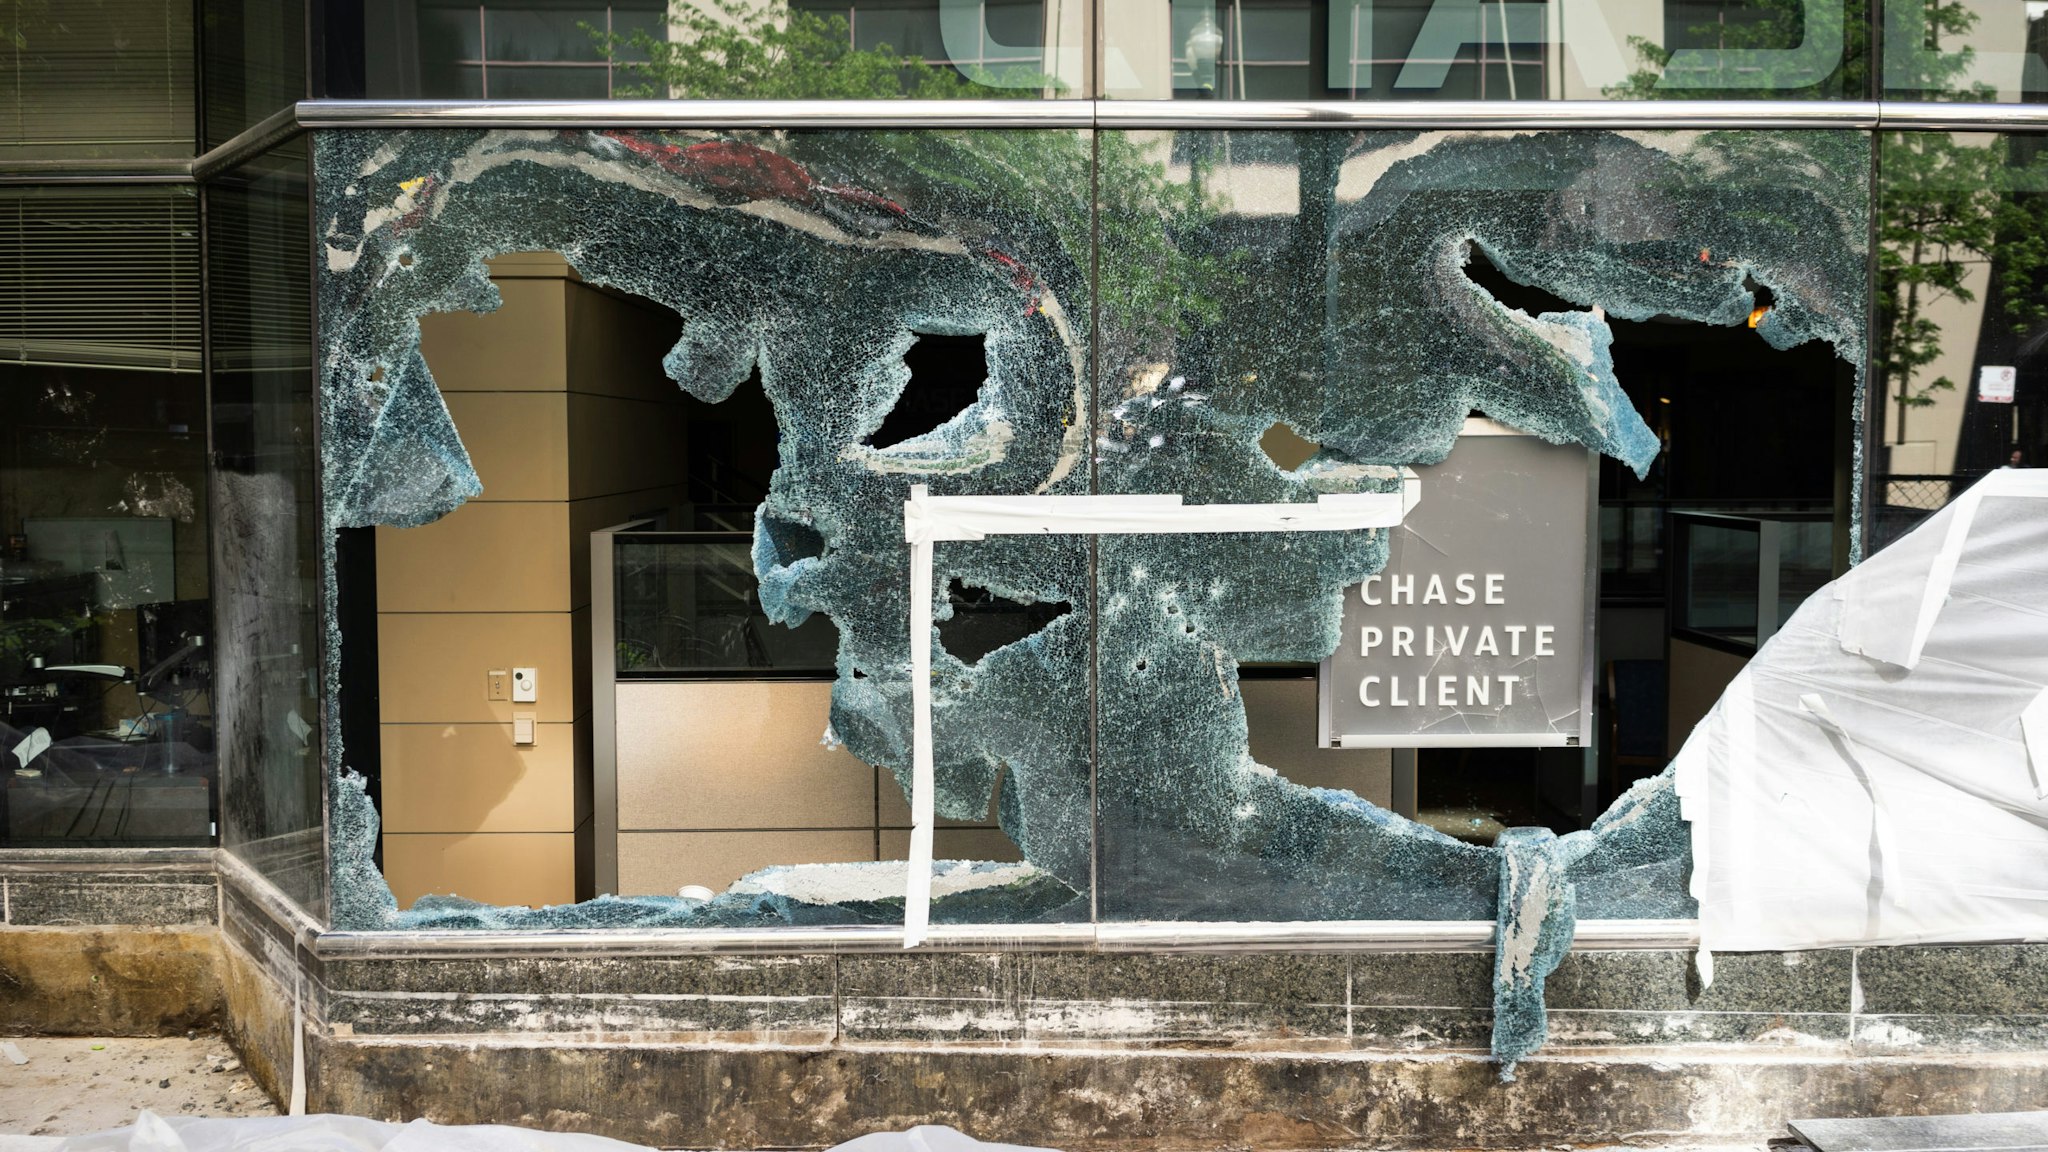 The windows of a Chase Bank are seen shattered in Downtown Chicago on May 31, 2020. On Saturday, thousands of demonstrators in Chicago protested the killing of George Floyd by Minneapolis Police. By the evening, looting and destruction of property spread throughout the city center. (Photo by Max Herman/NurPhoto via Getty Images)